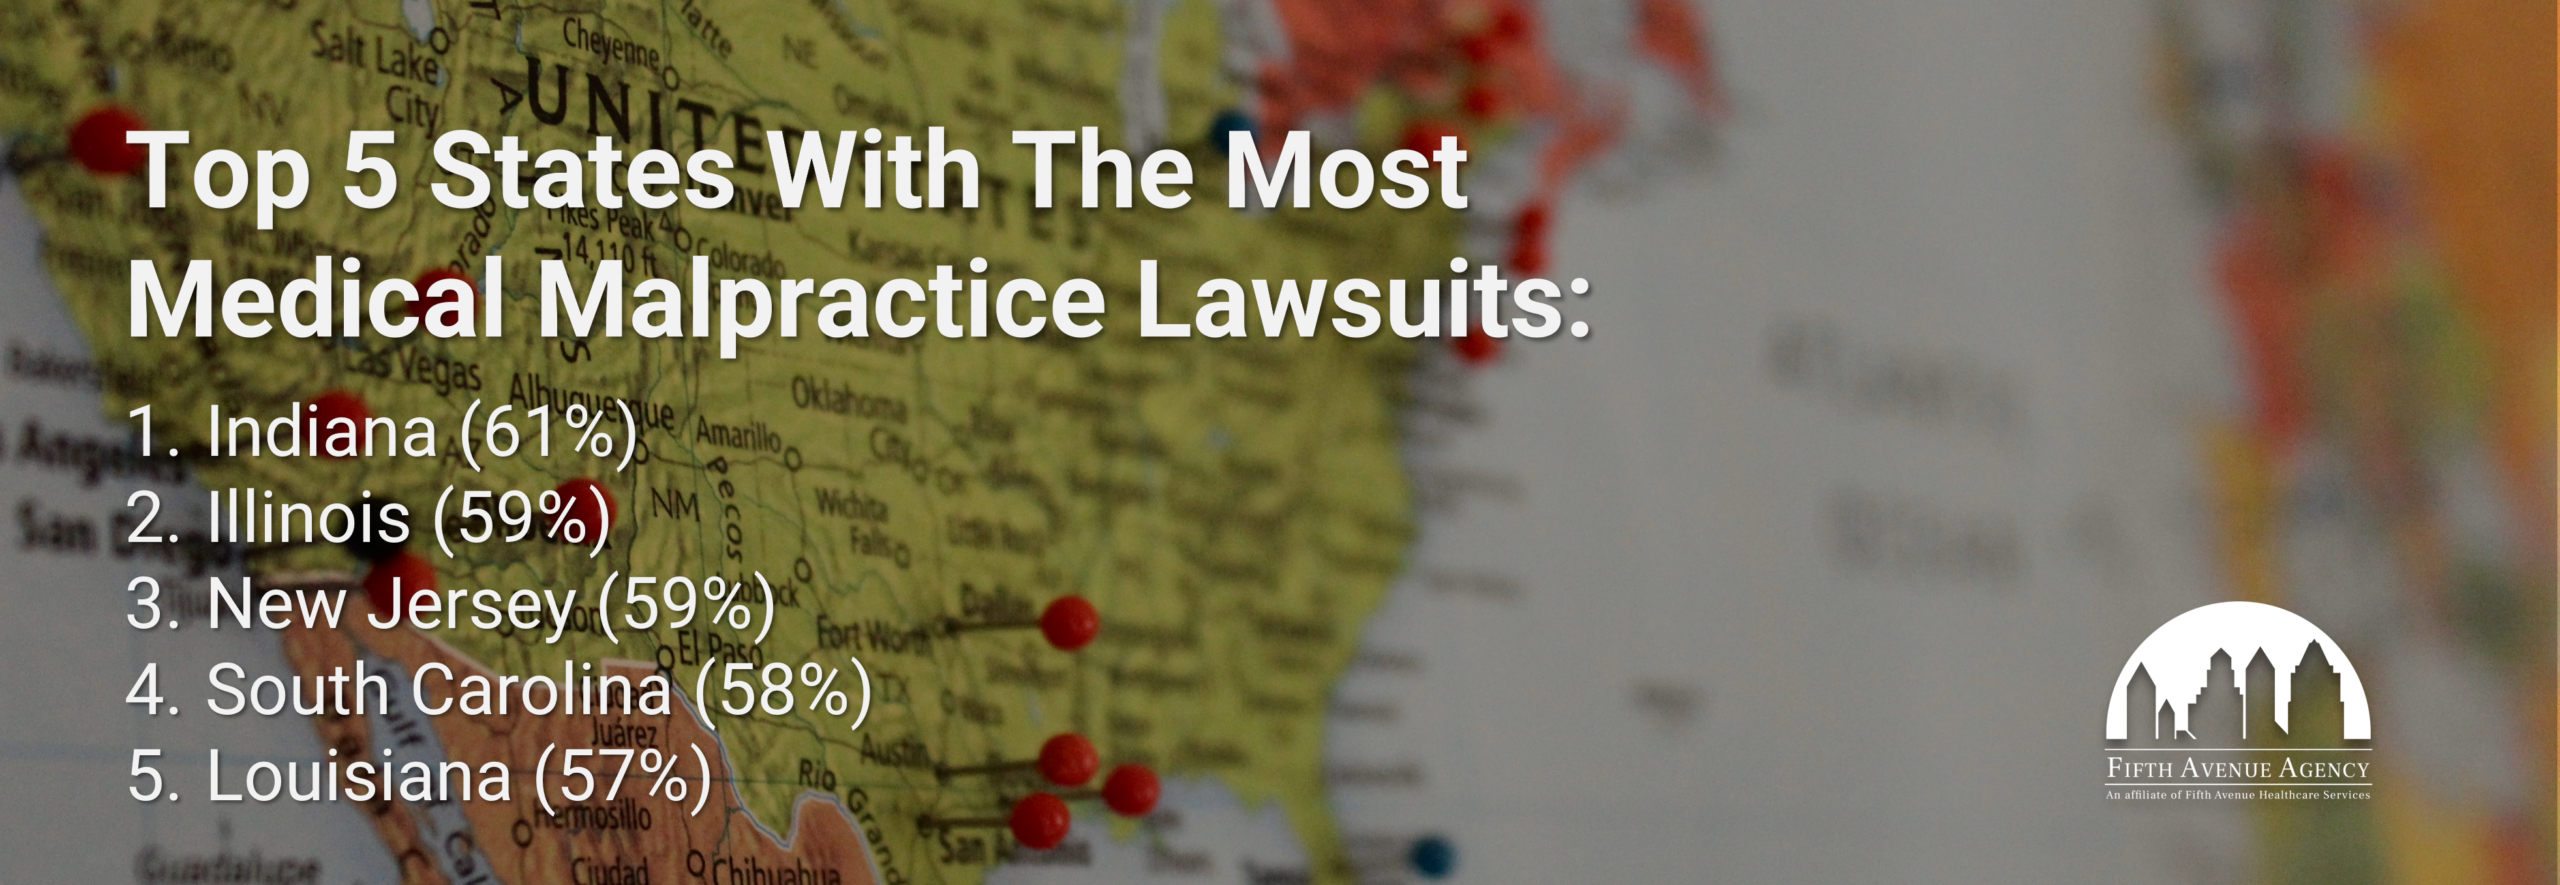 Top 5 States With Most Medical Malpractice Lawsuits